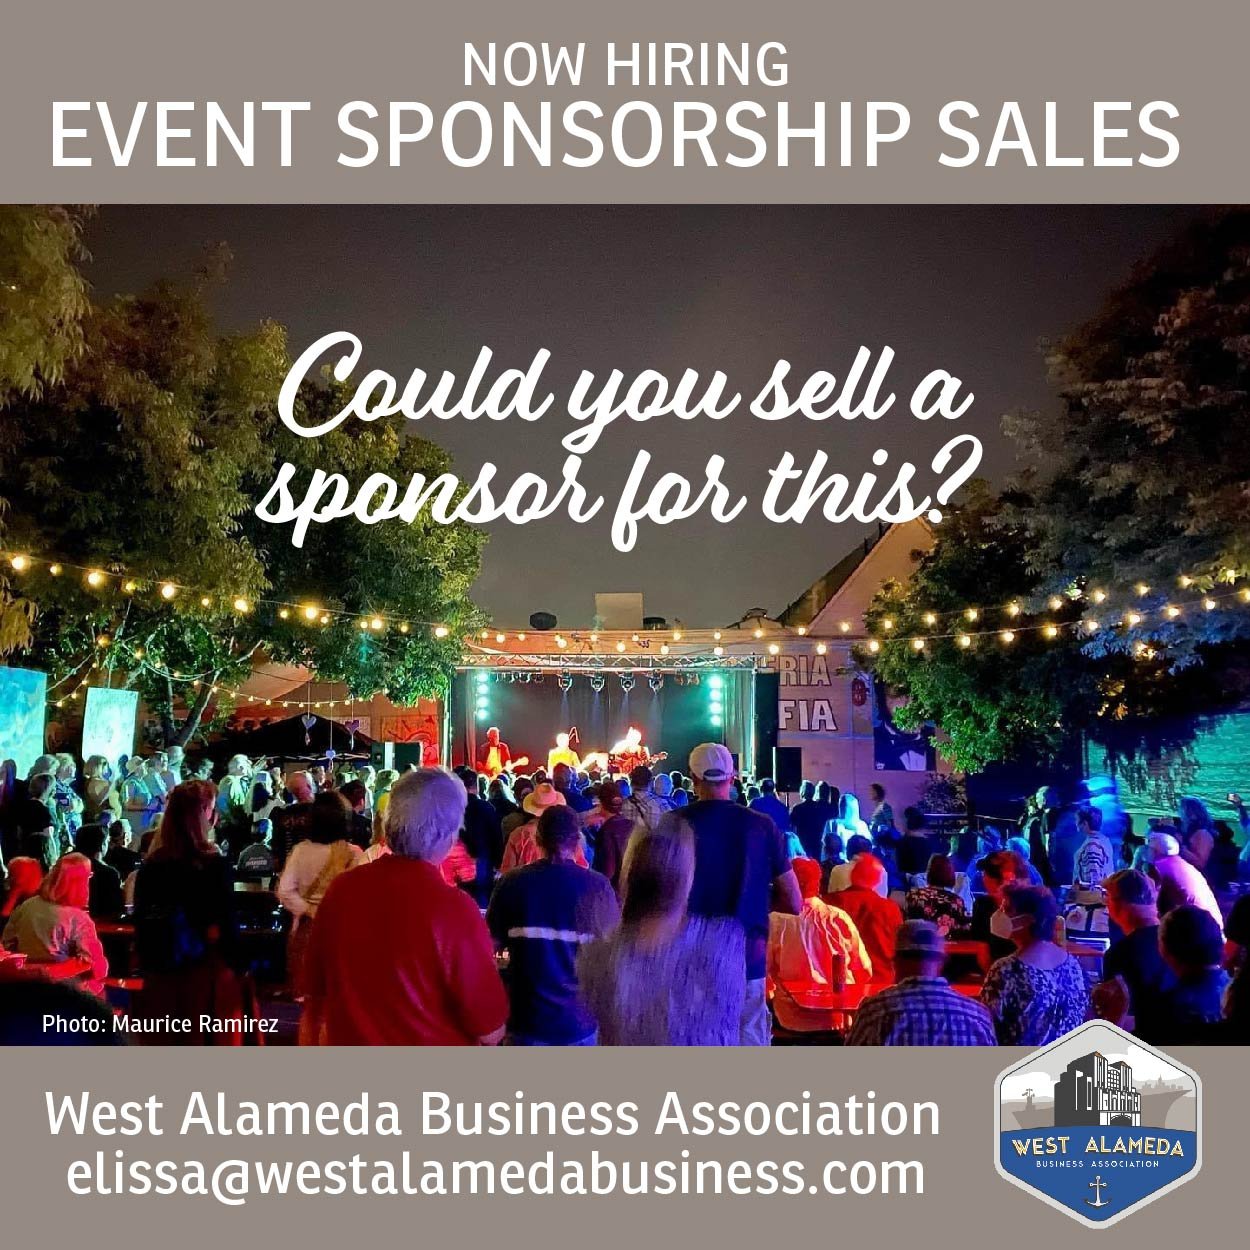 🌟 Join Our Team! West Alameda Business Association Seeks Sponsorship Sales Consultant 🌟

Are you a well-connected individual with a passion for fostering community engagement? The West Alameda Business Association (WABA) is on the lookout for a dyn